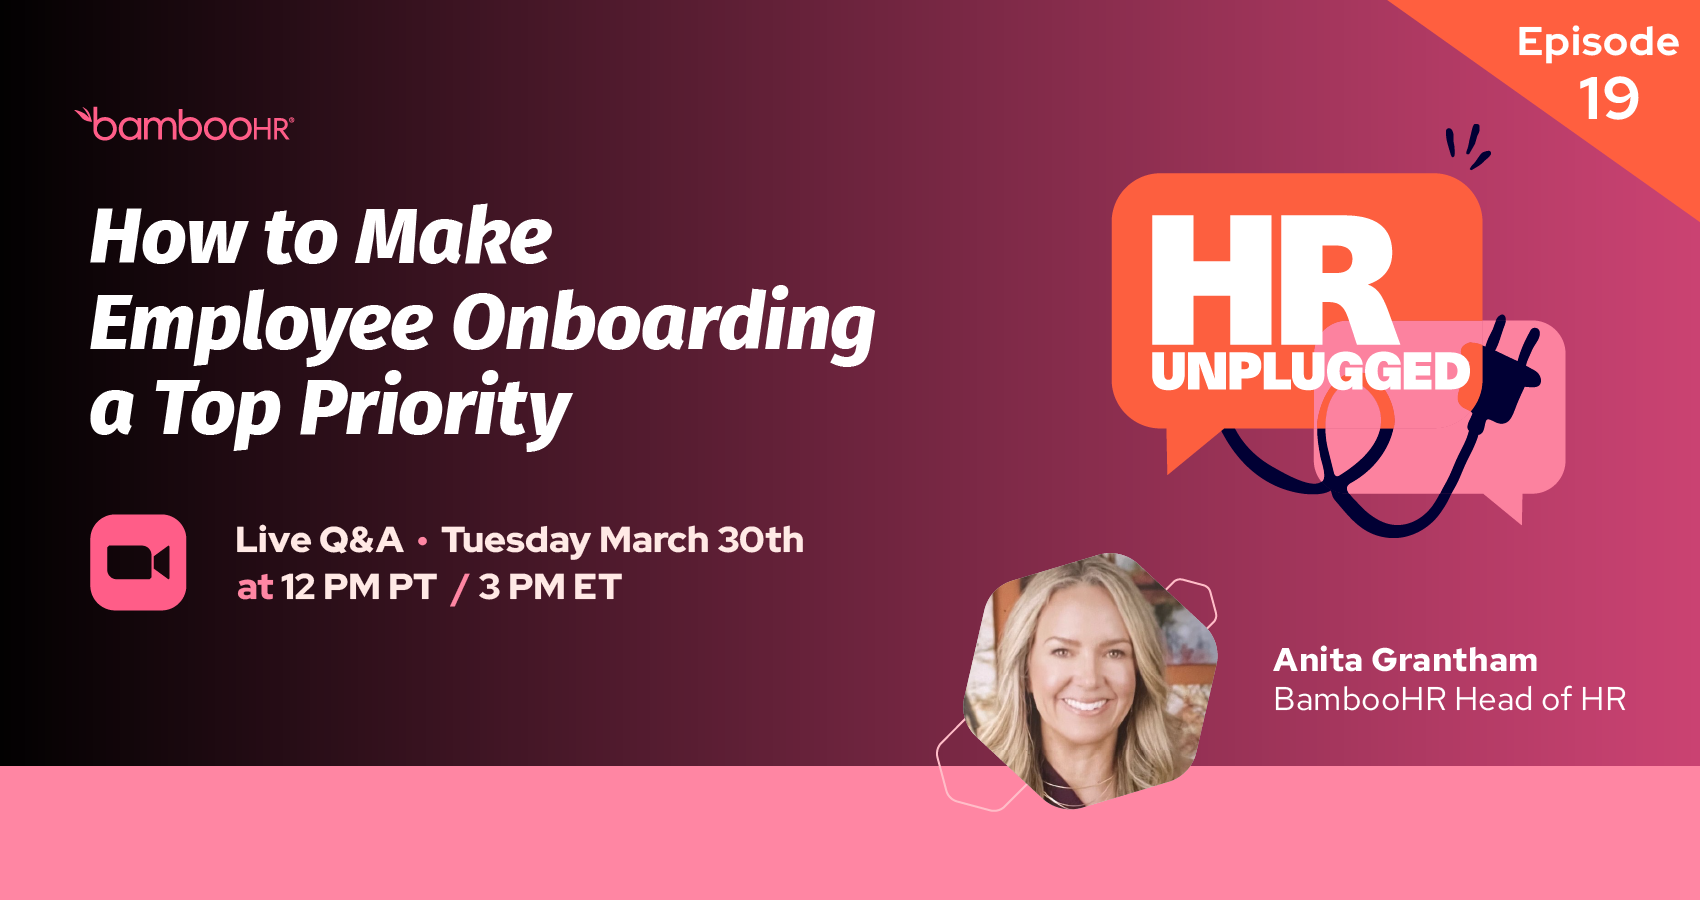 HR Unplugged Episode 19: How to Make Employee Onboarding a Top Priority